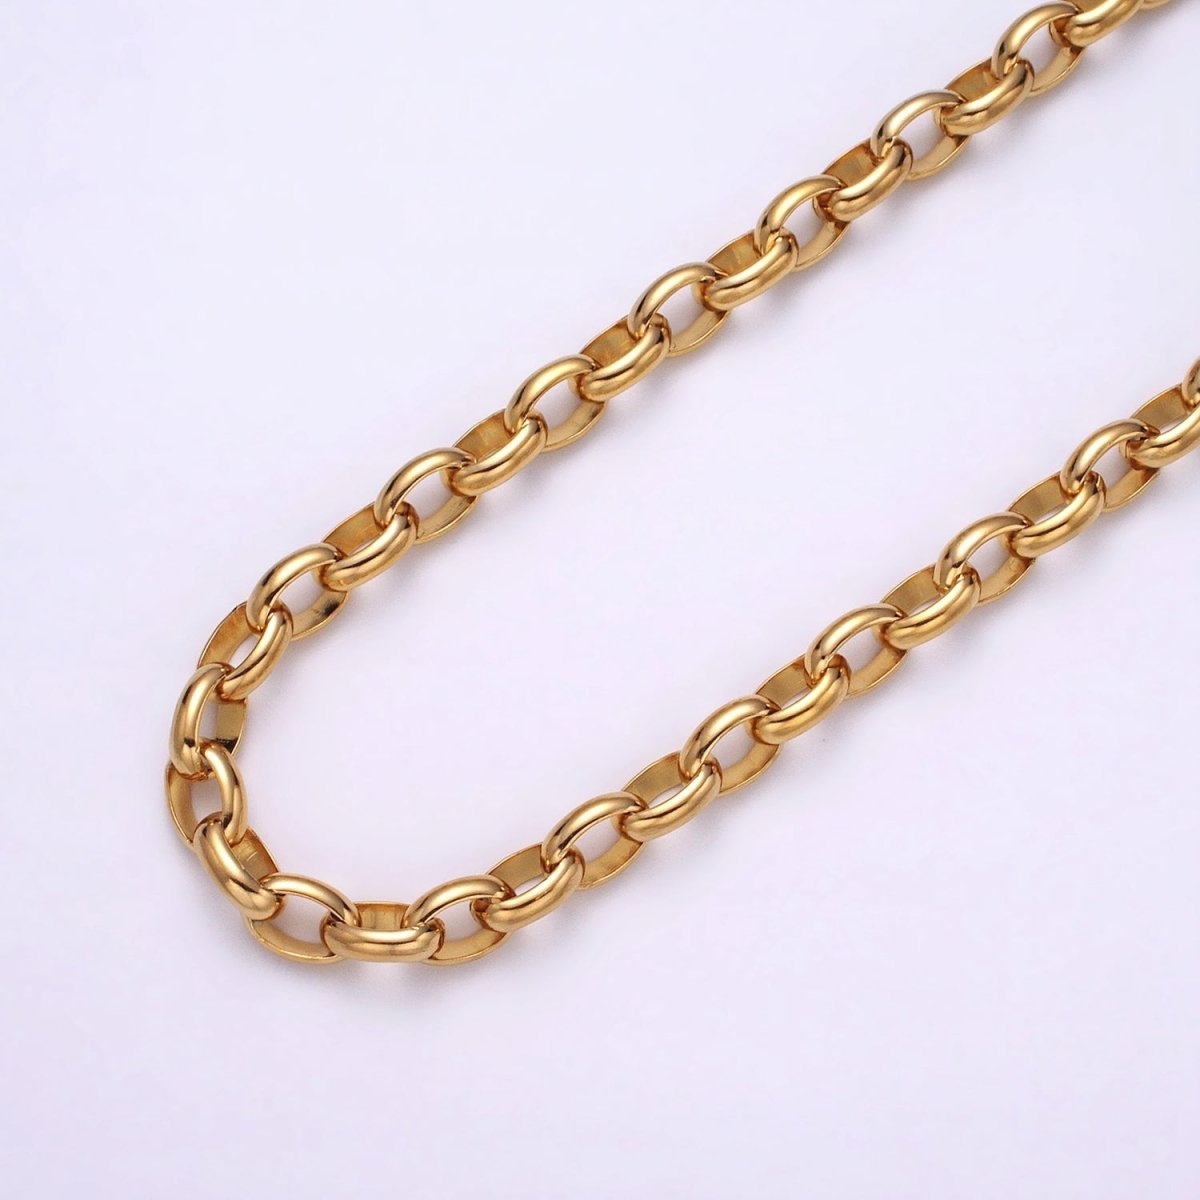 16K Gold Filled Large Chunky Gold, Silver Oval Chain, Thick Link Chain by the Yard Wholesale Chain Jewelry Supplies | ROLL-1273 ROLL-1274 Clearance Pricing - DLUXCA